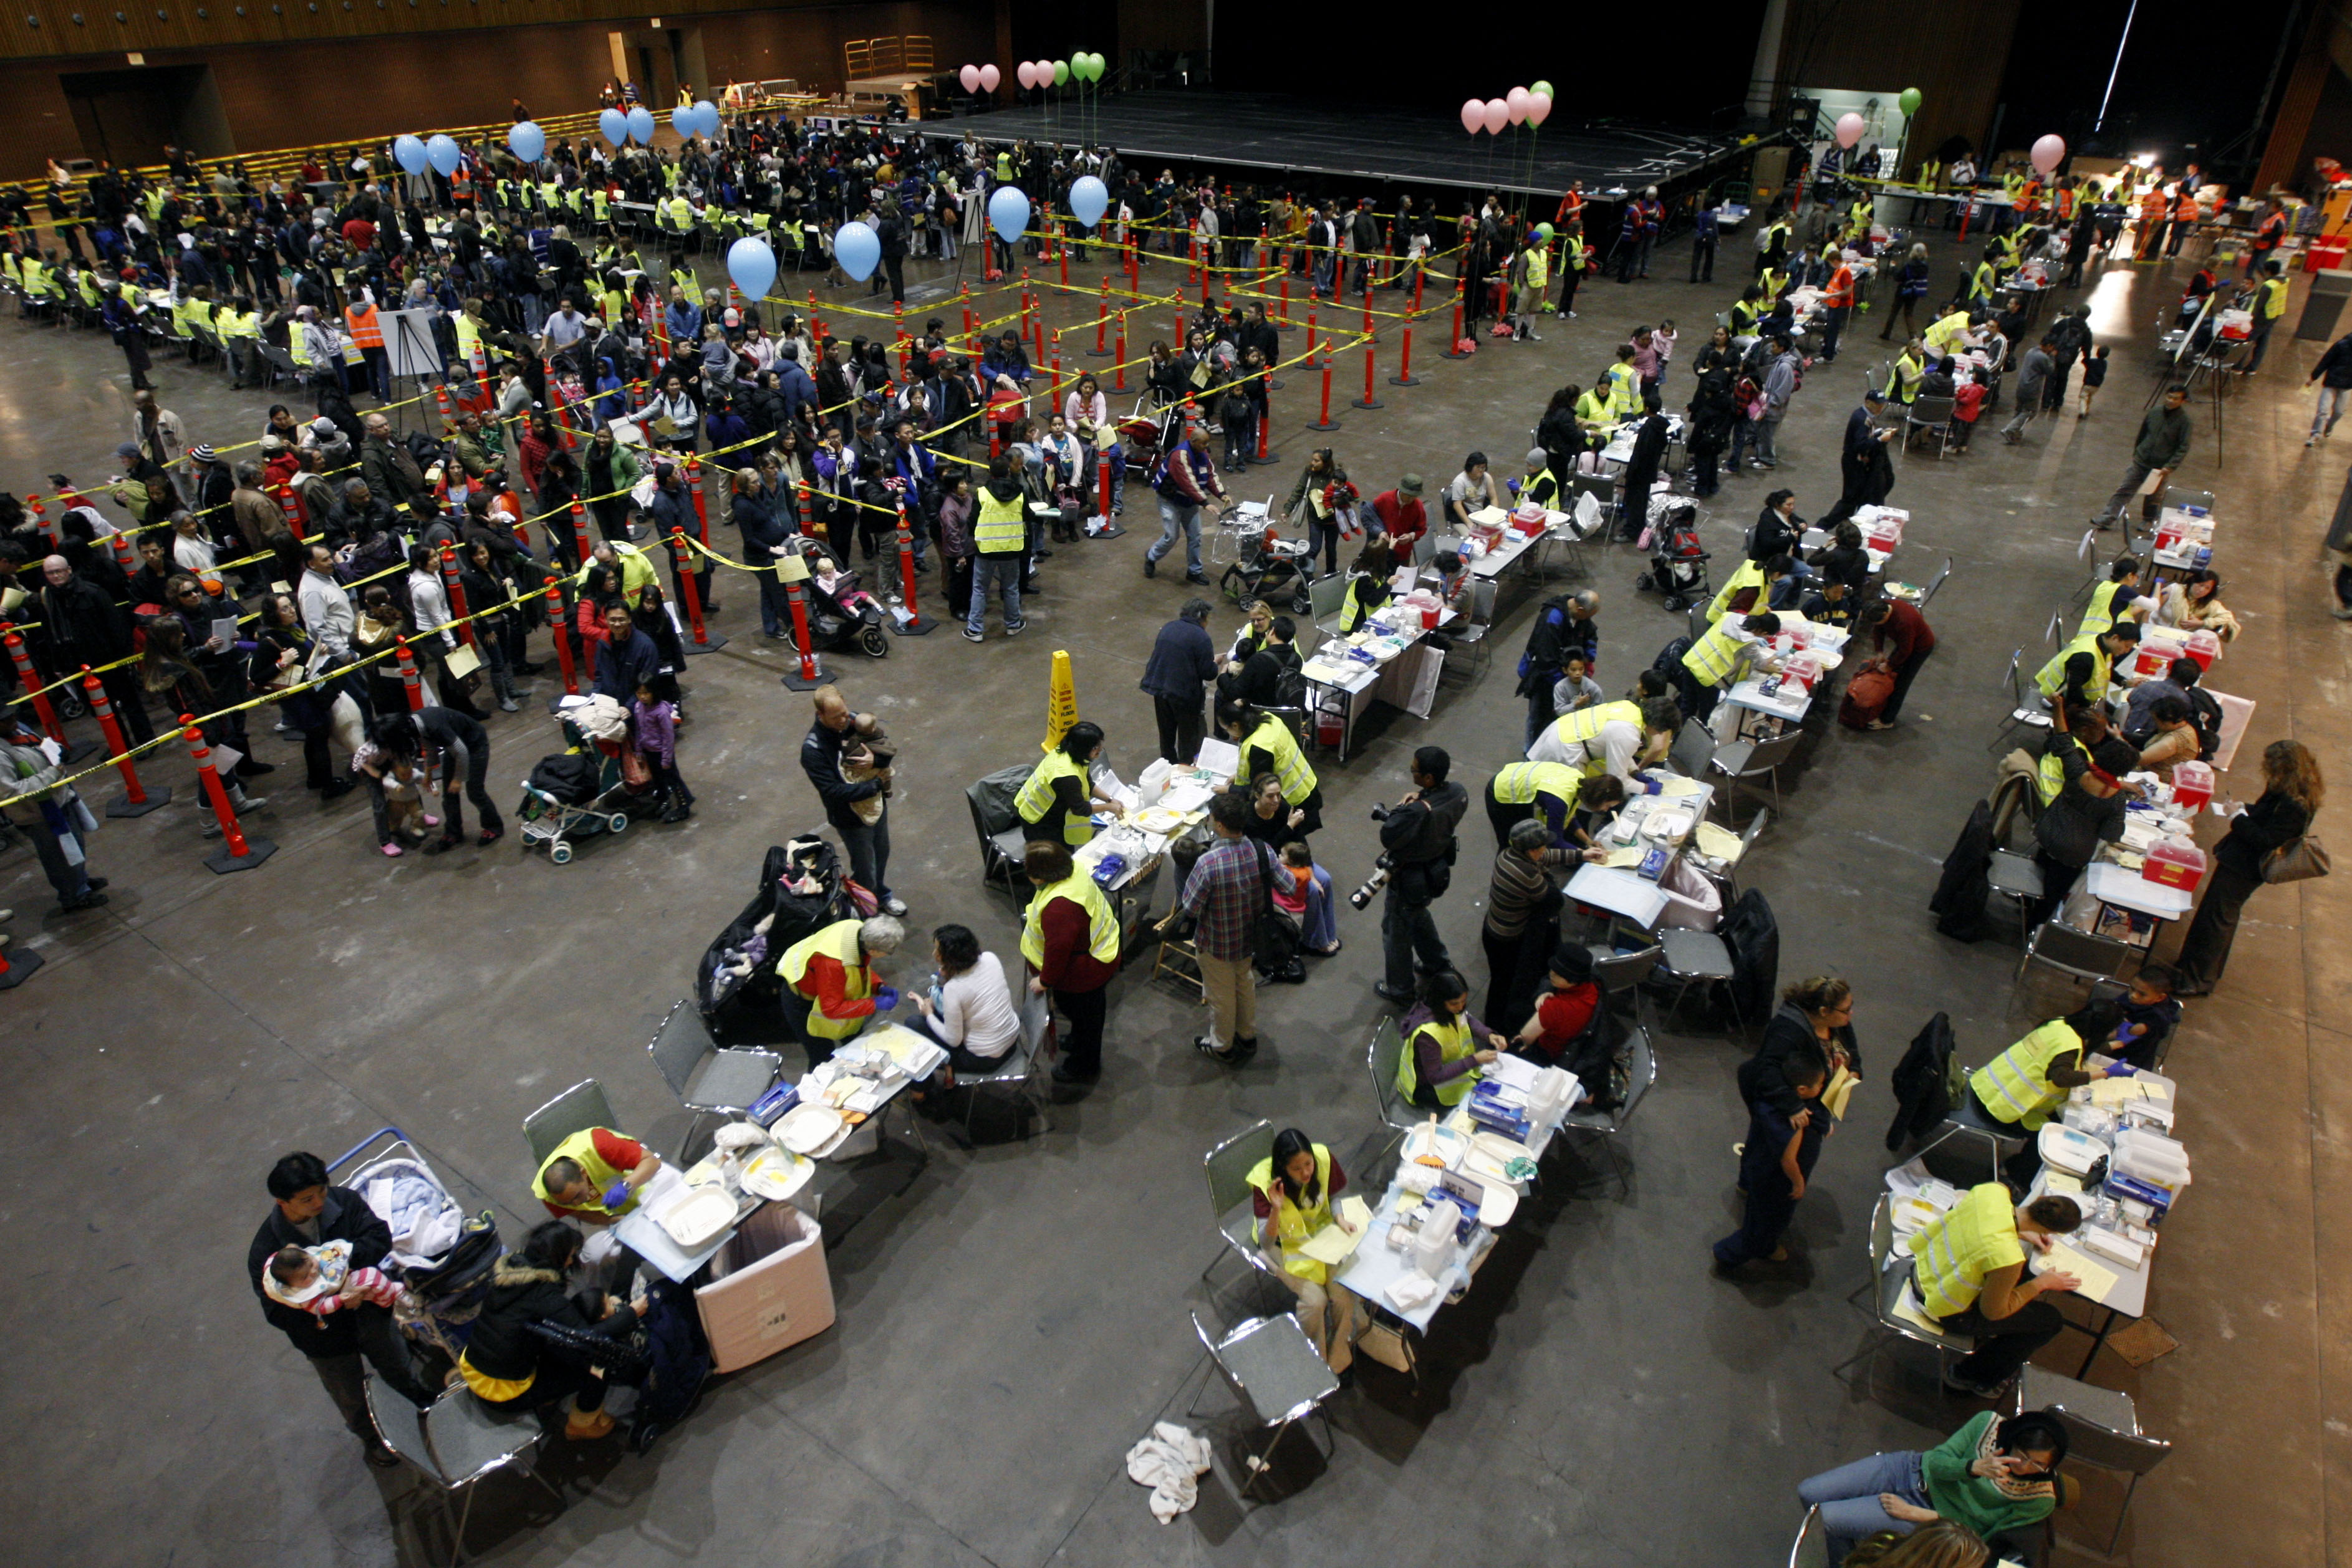 An areal view of a large-scale vaccination set up in a warehouse-like room.